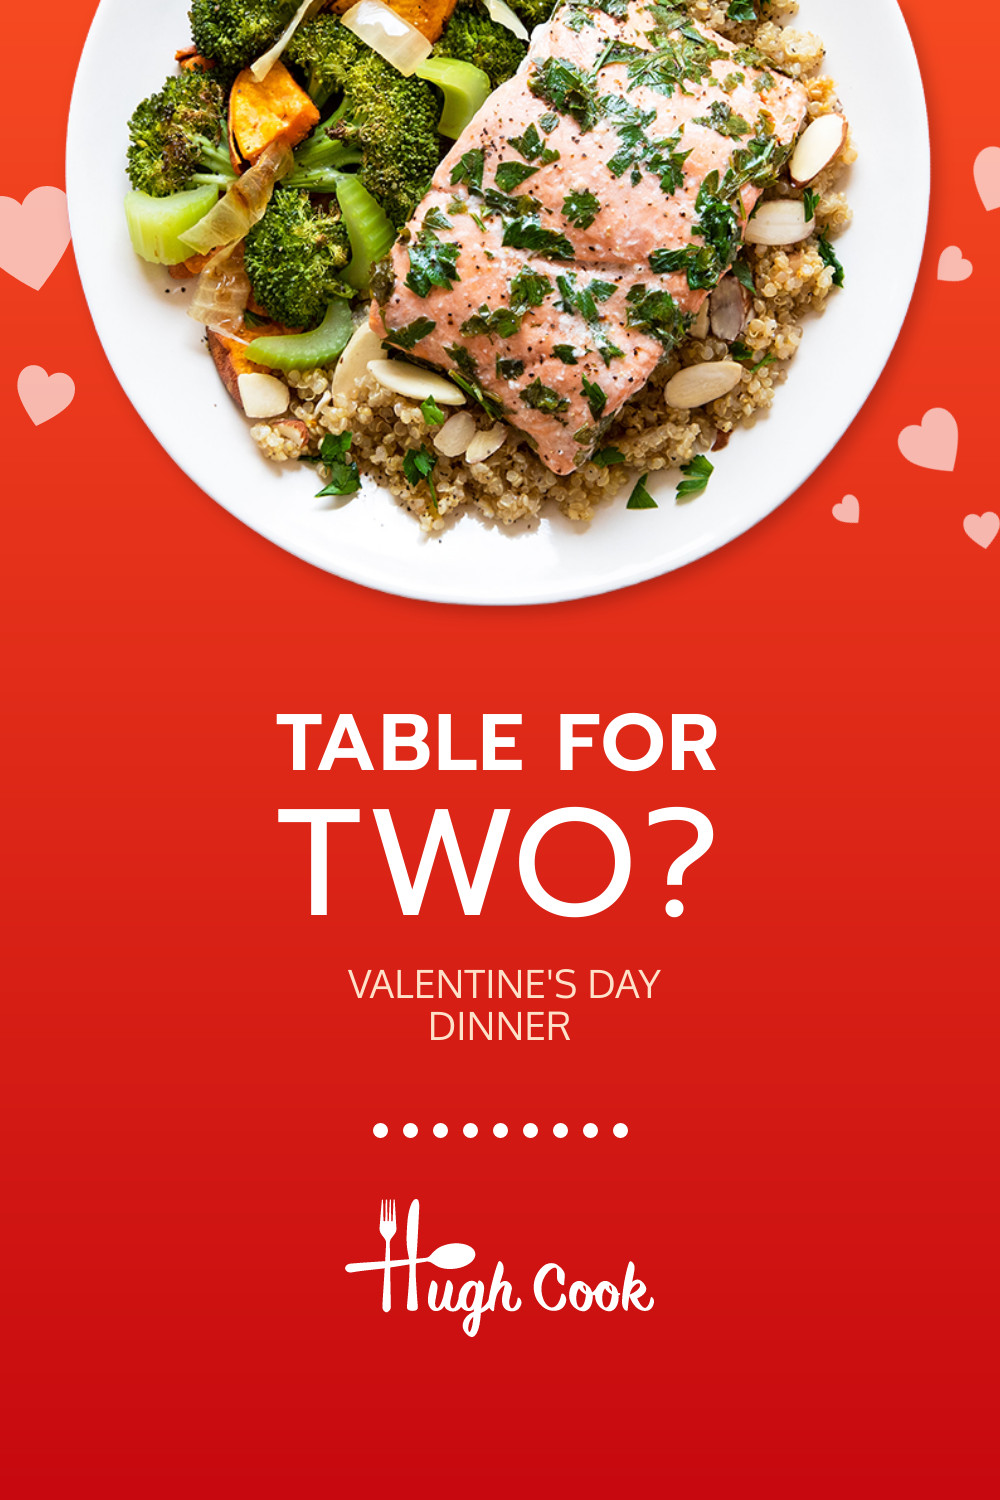 Table For Two on Valentine's Day Inline Rectangle 300x250